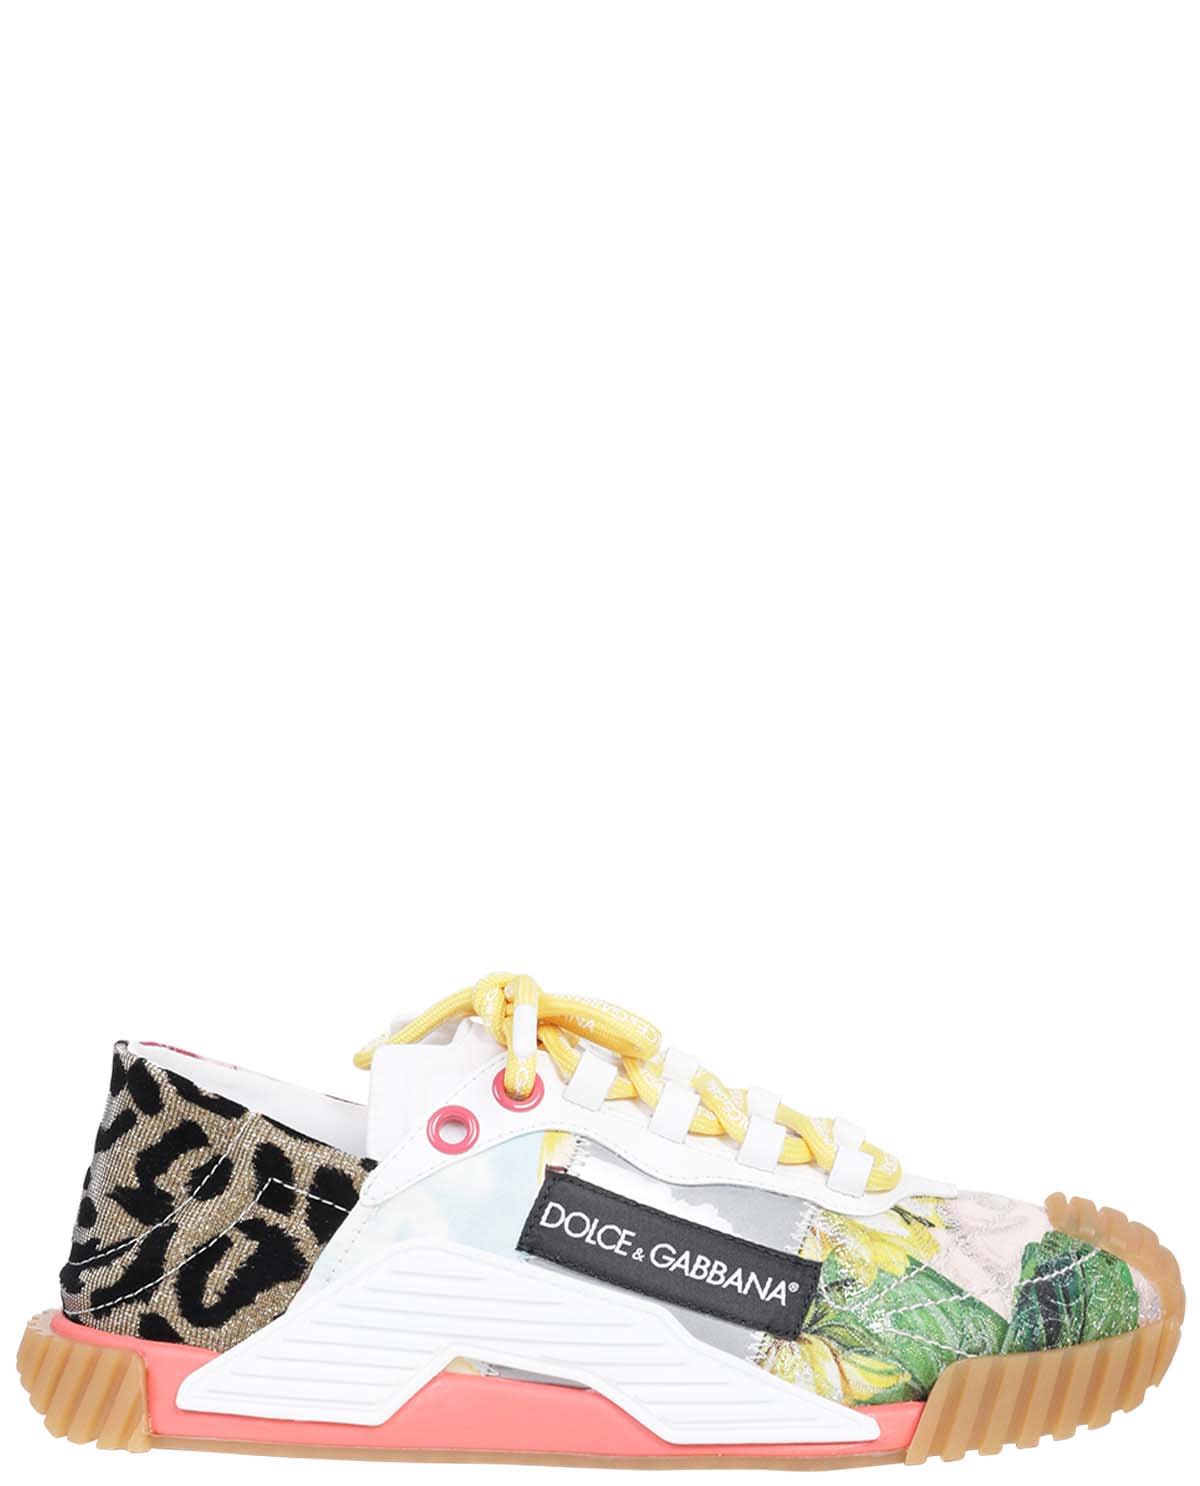 Buy Dolce & Gabbana Patchwork Ns1 Sneakers online, shop Dolce & Gabbana shoes with free shipping